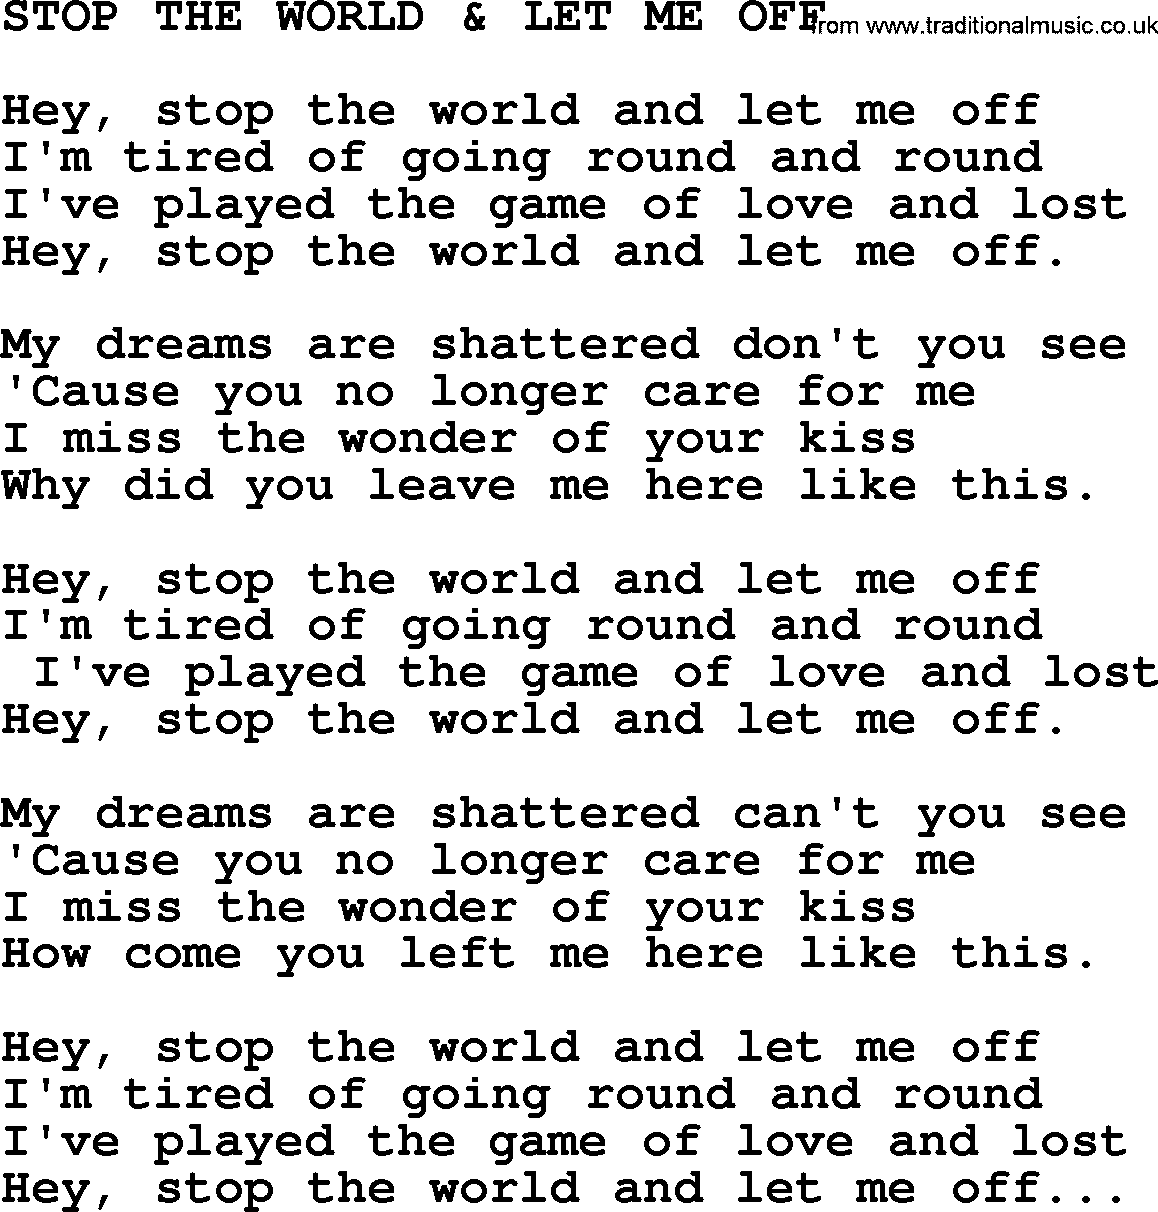 Merle Haggard song: Stop The World & Let Me Off, lyrics.